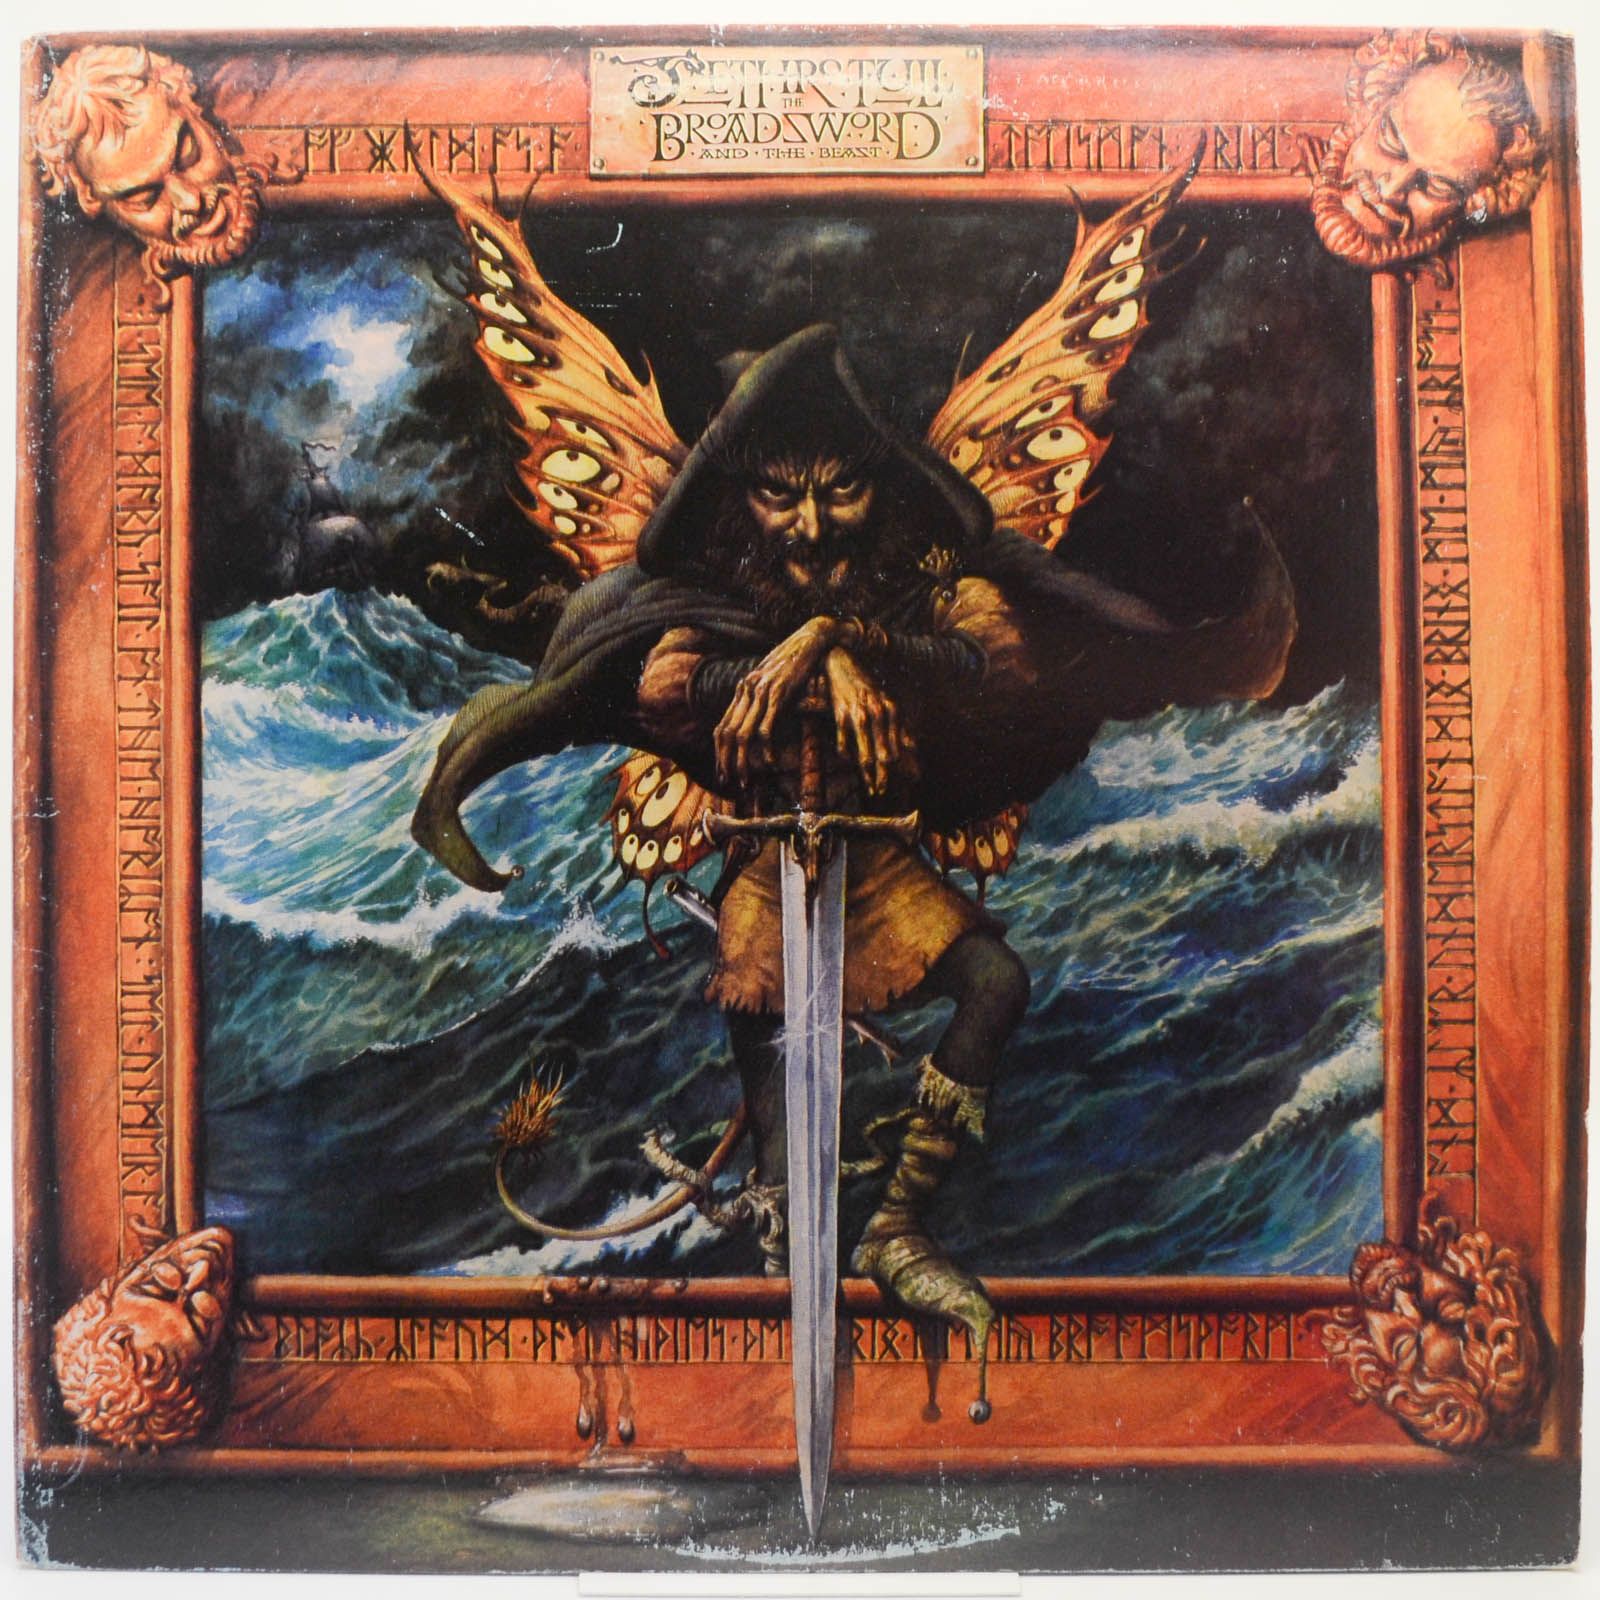 Jethro Tull — The Broadsword And The Beast (USA), 1982